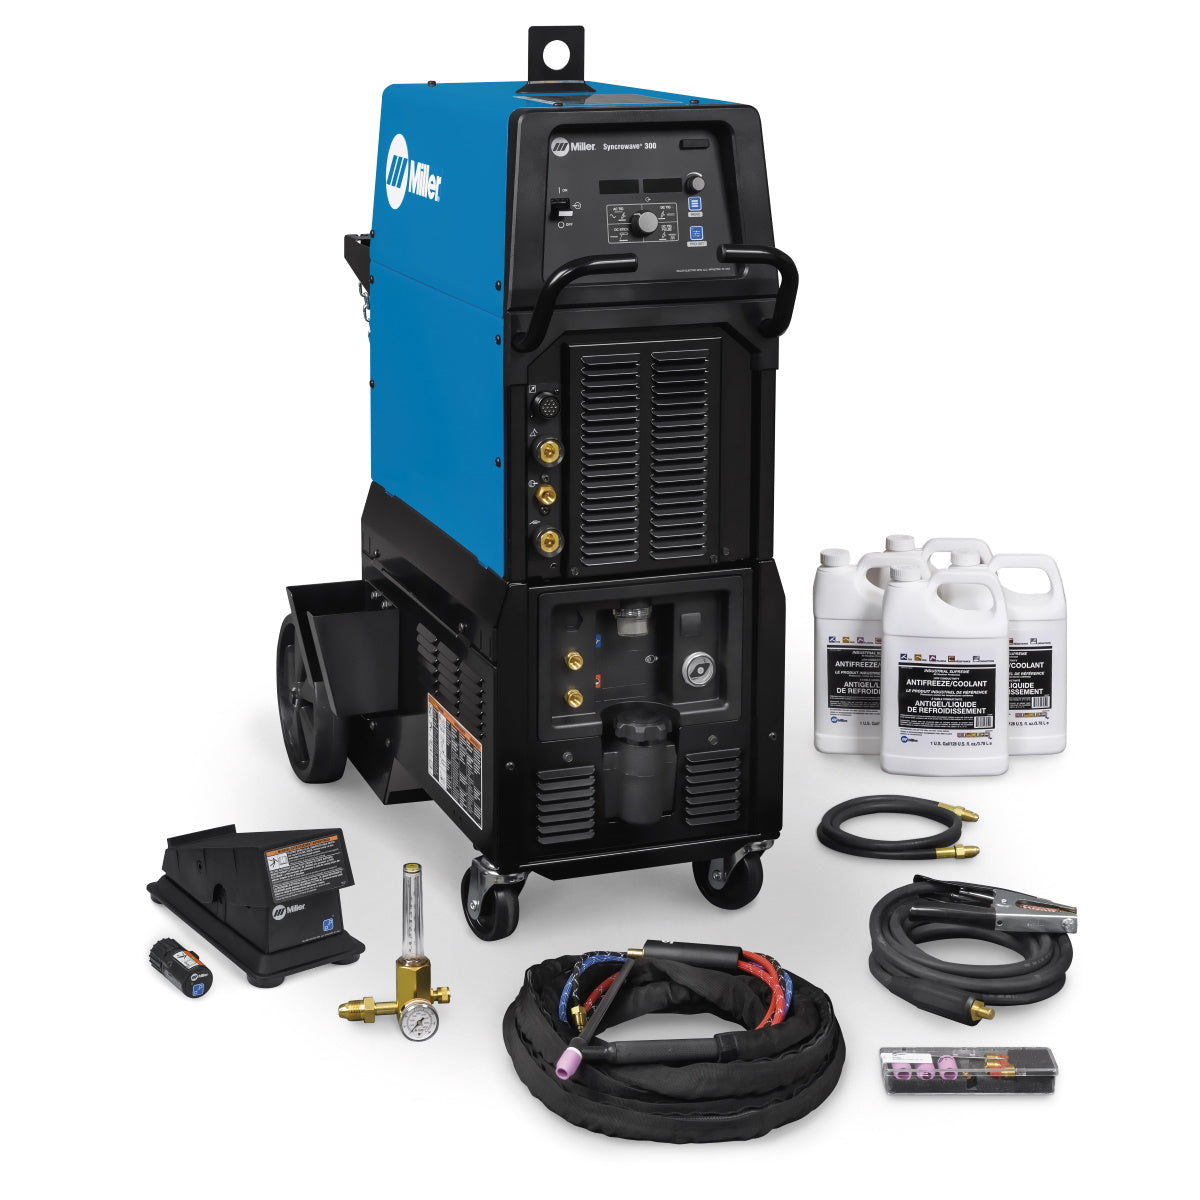 Miller Syncrowave 300 AC/DC TIG and Stick Welder Complete Pkg w/Wireless Foot Control - 951872